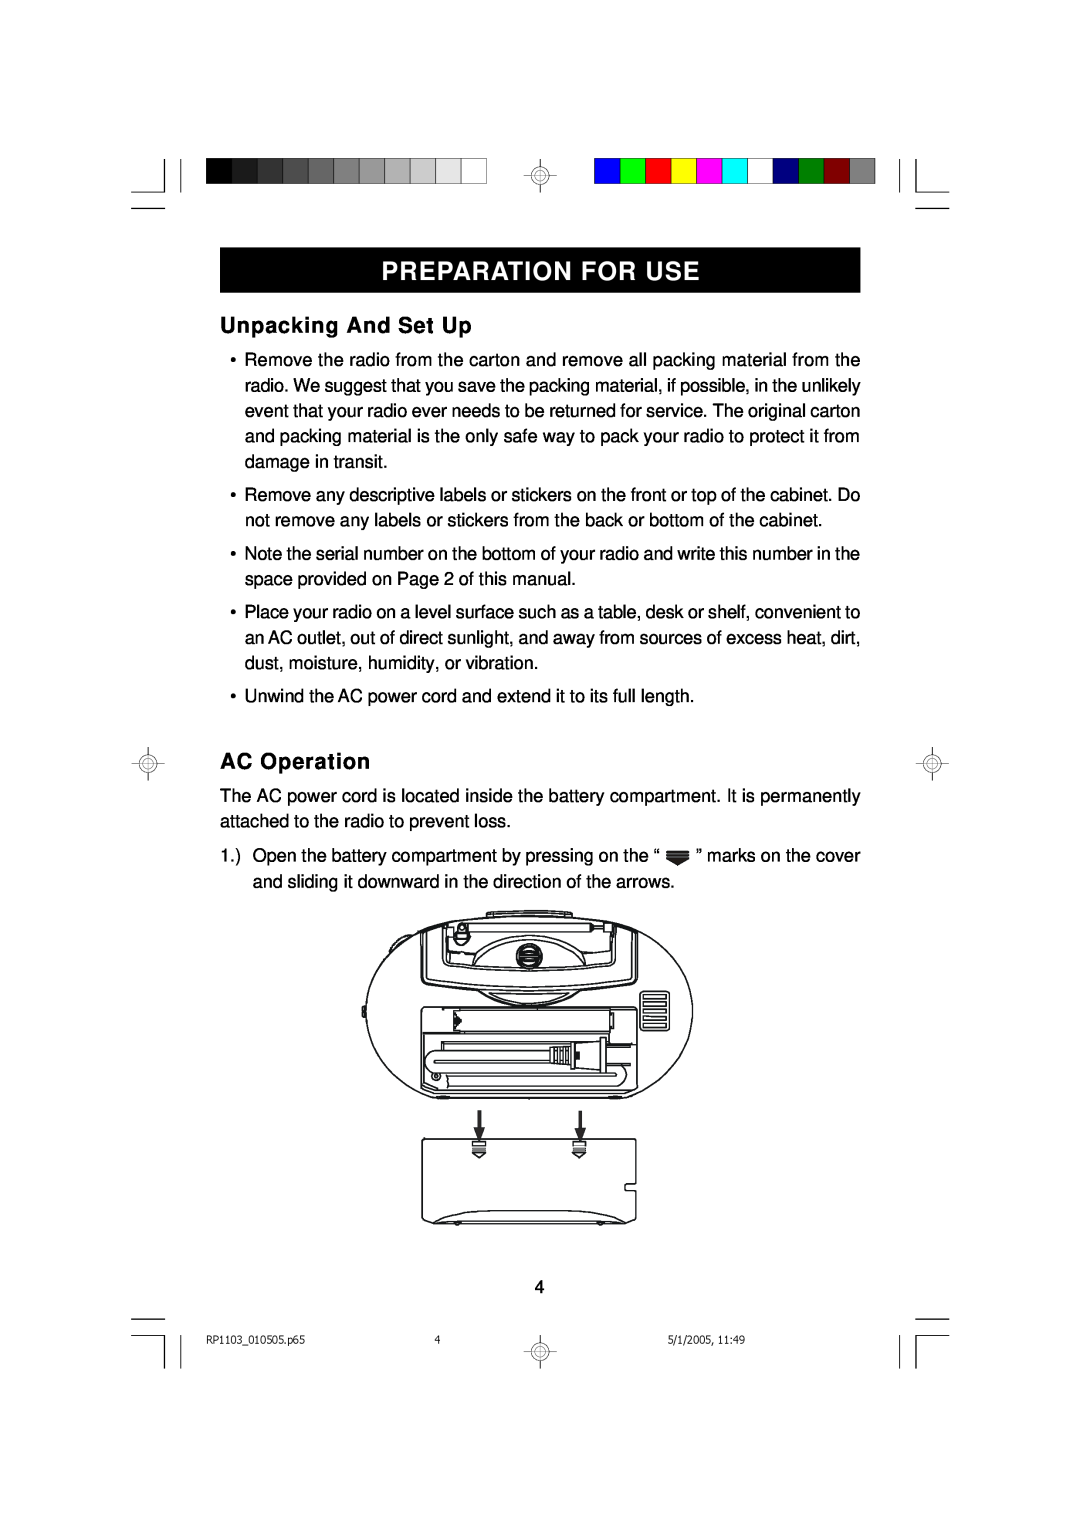 Emerson RP1103 owner manual Preparation For Use, Unpacking And Set Up, AC Operation 